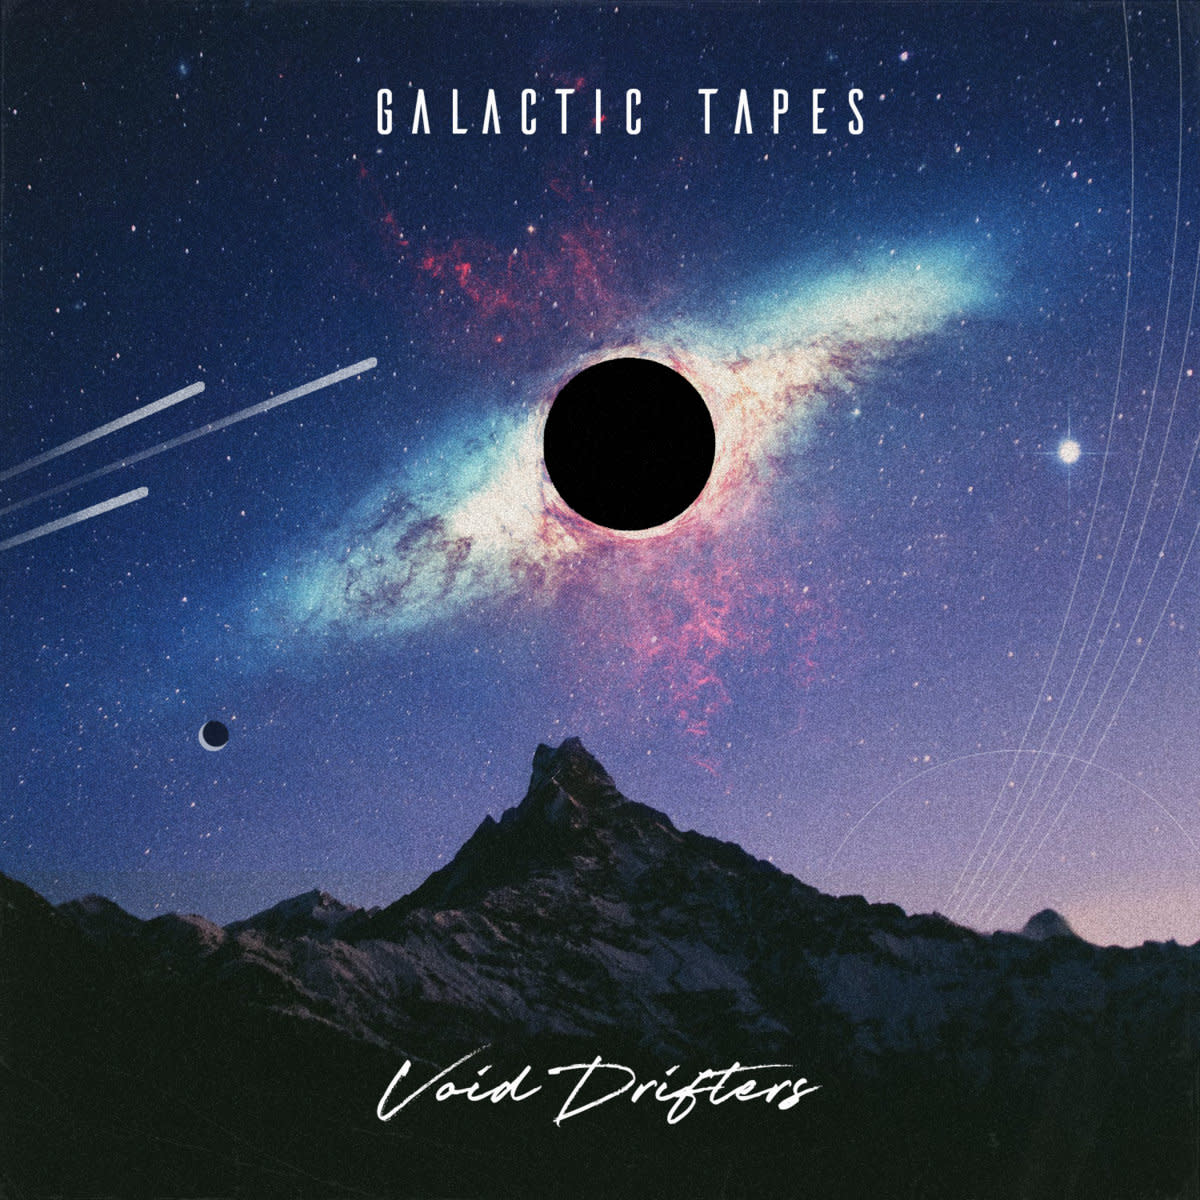 synth-album-review-the-void-drifter-by-galactictapes